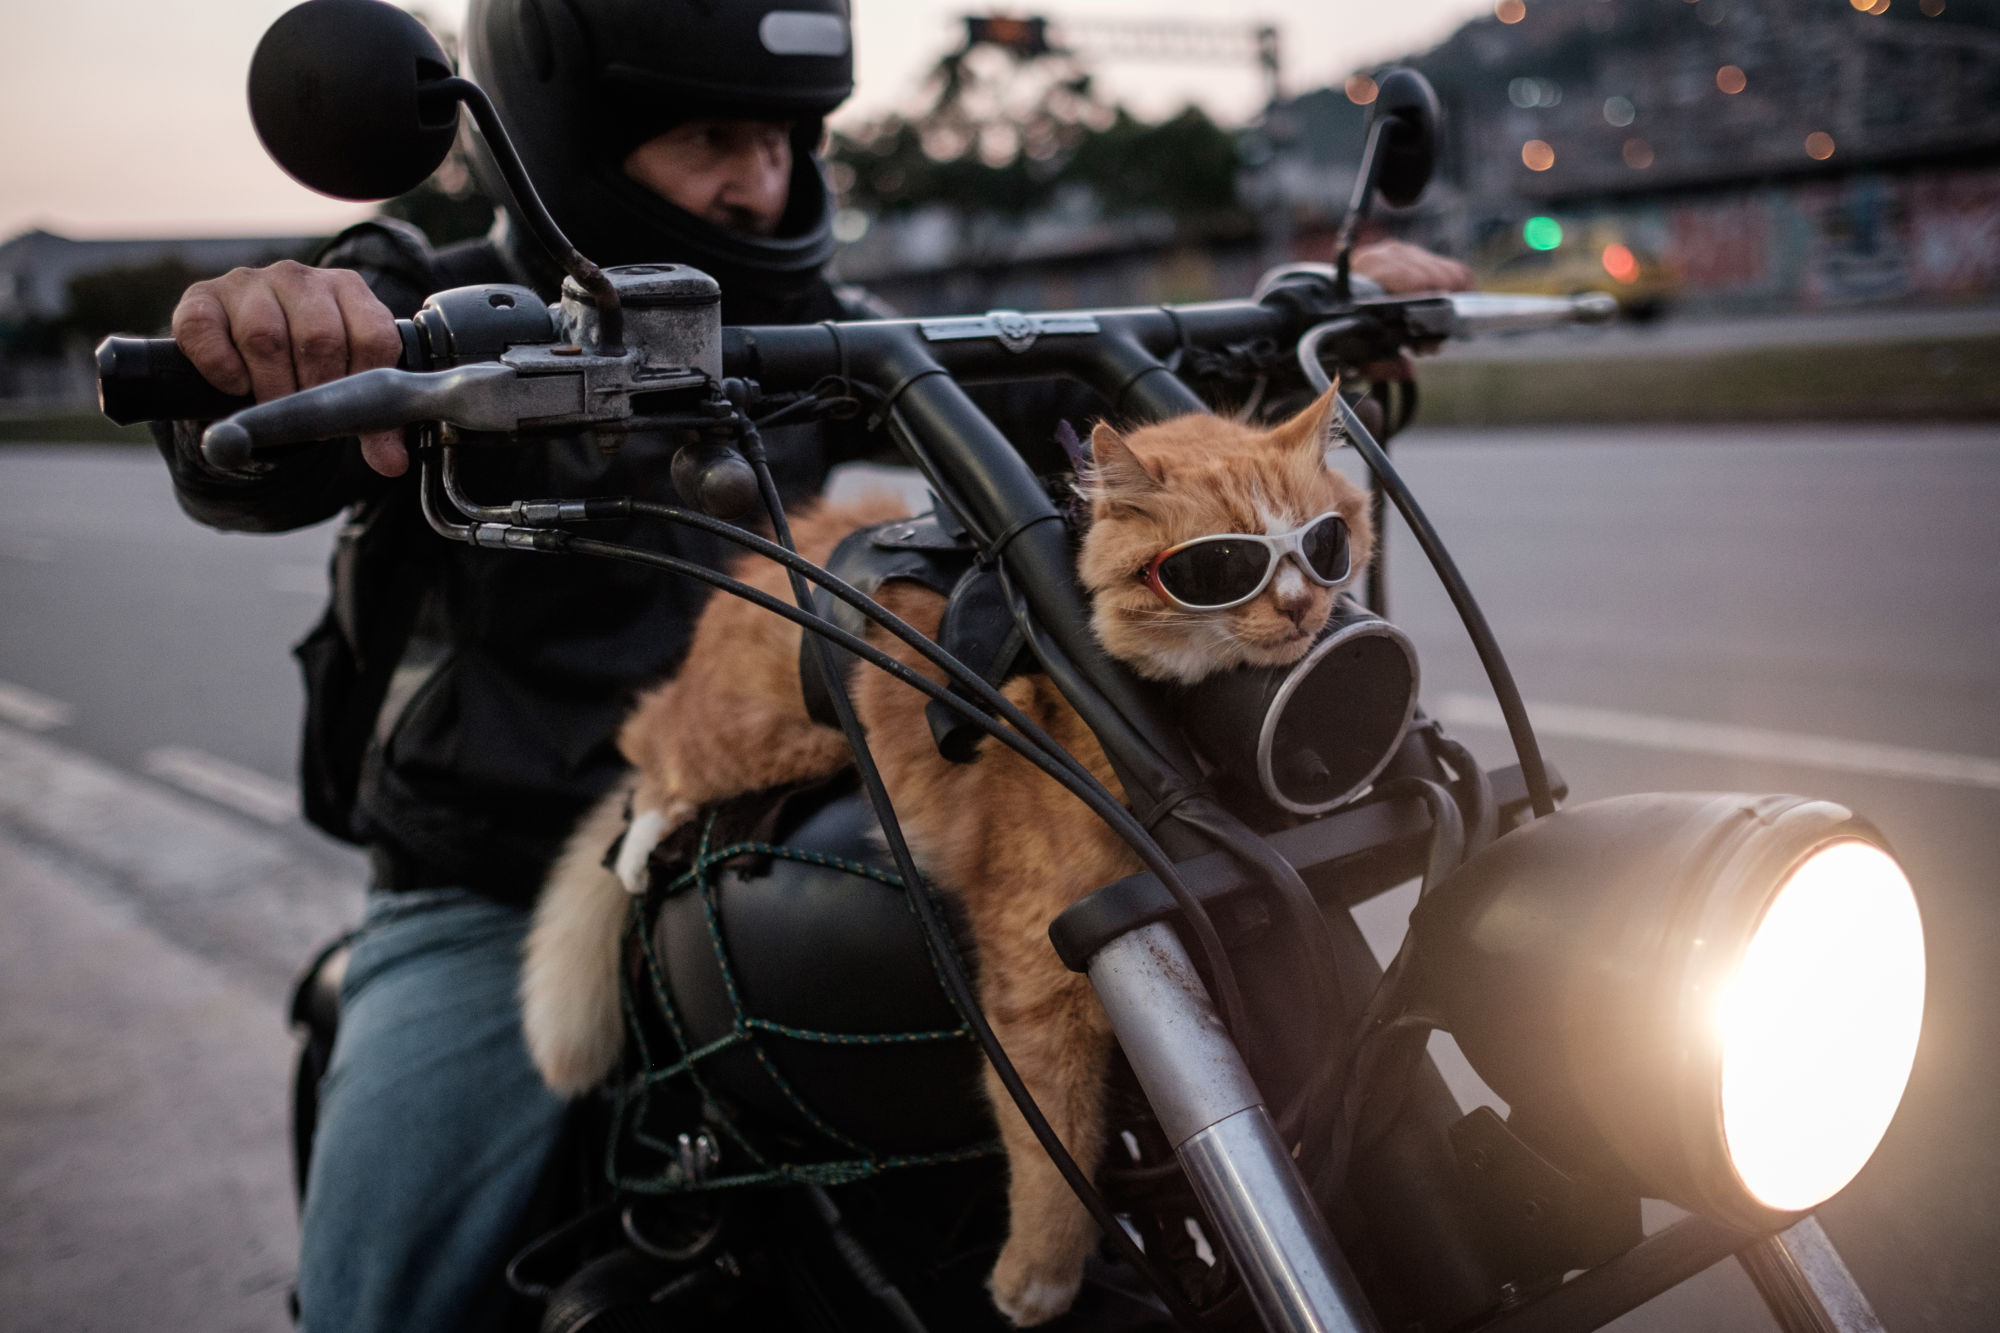 cat riding on motorcycle